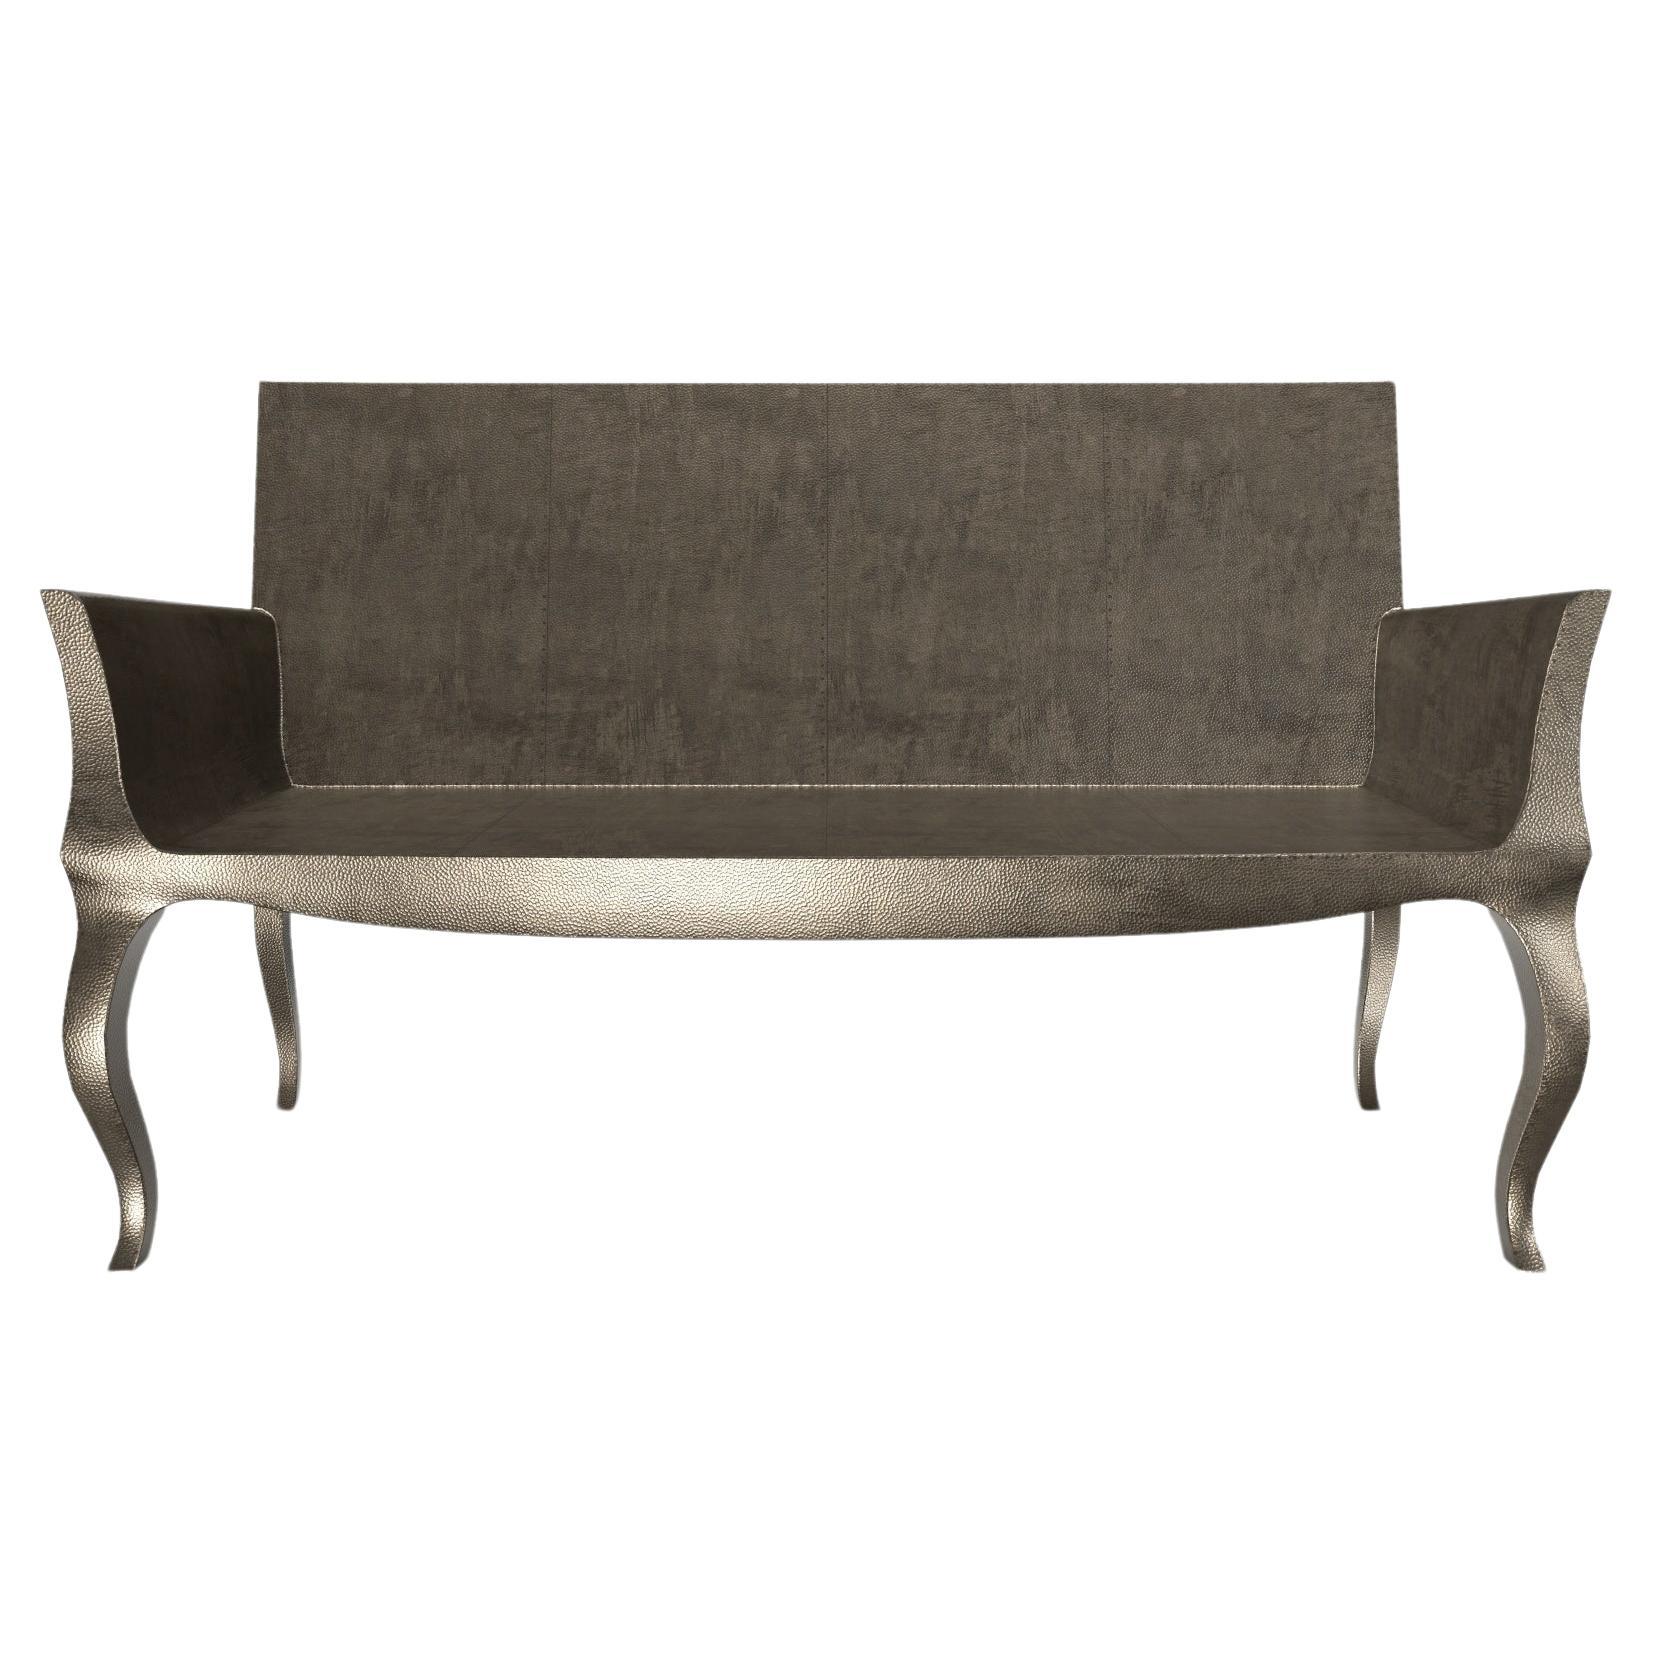 Louise Settee Art Deco Daybeds in Mid. Hammered Antique Bronze by Paul Mathieu  For Sale